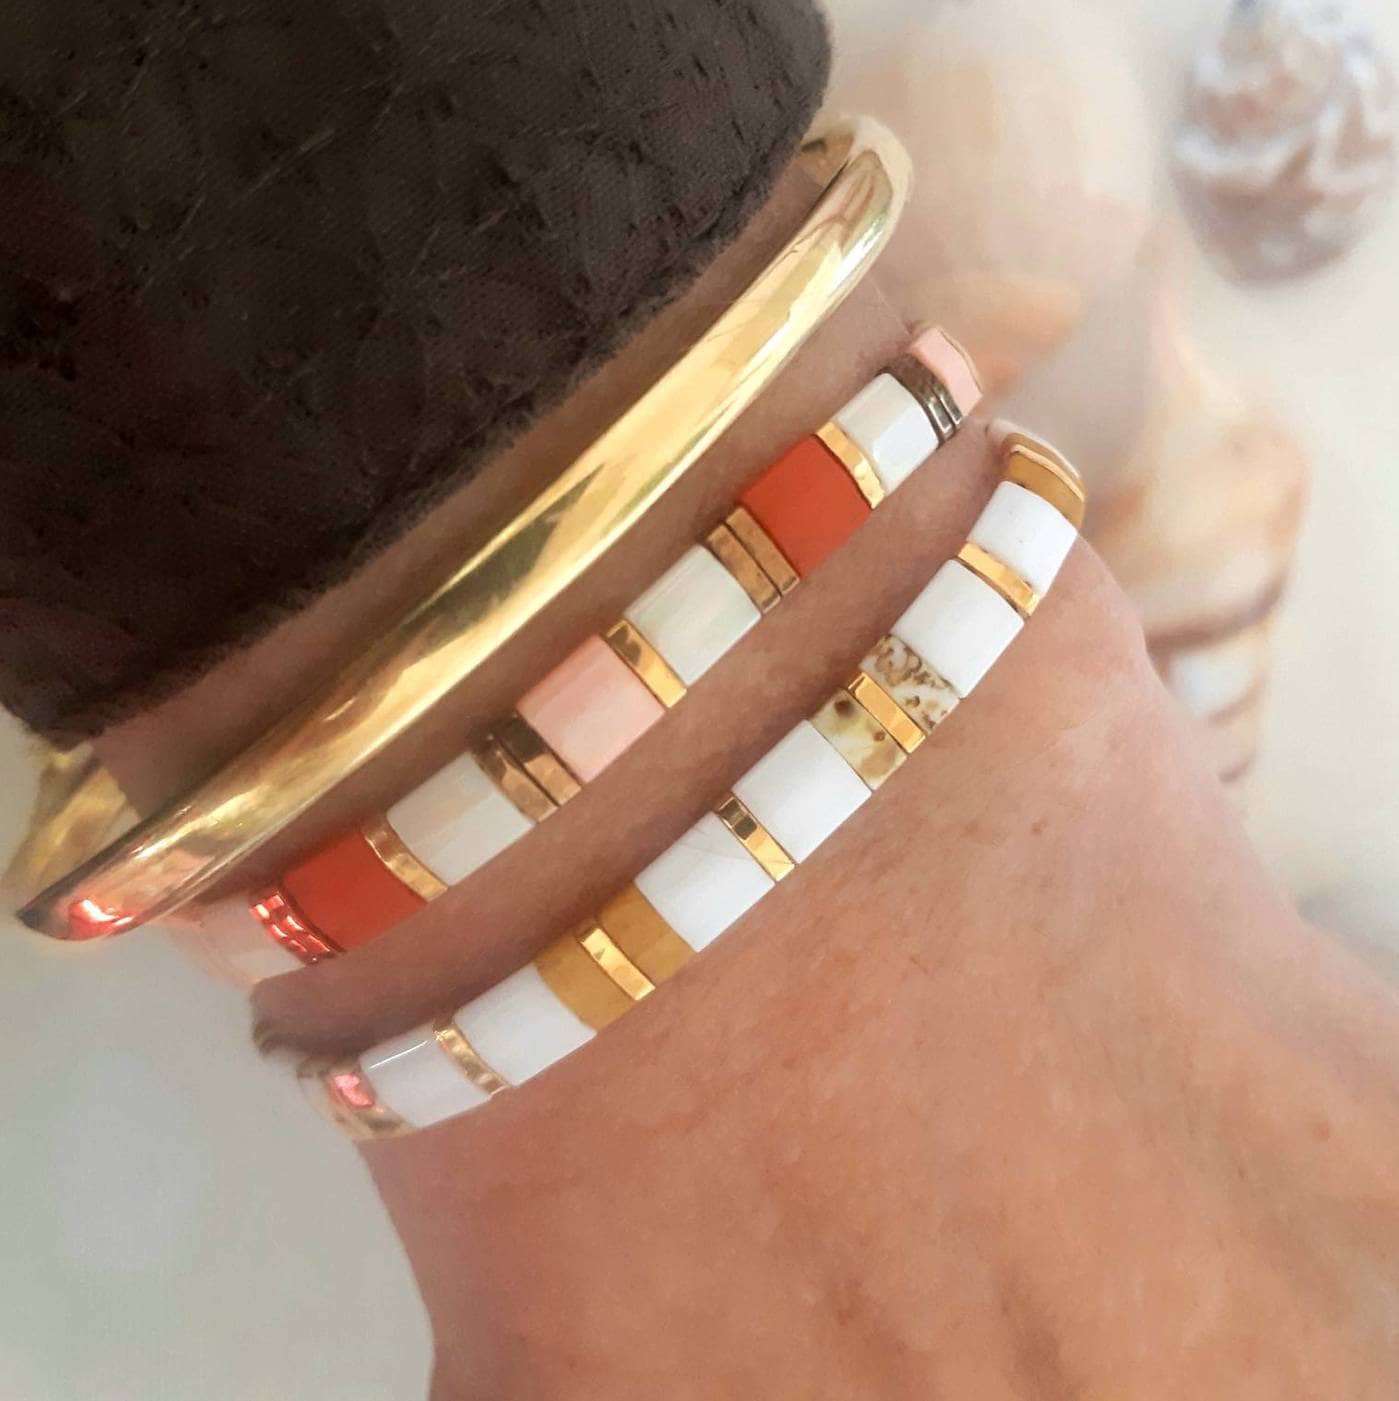 Fine and Elegant Bracelet in Japanese Miyuki Beads in Coral, White, Pale  Pink, Saffron Yellow and Gold 24K Tones, Two Colors to Choose From. -   Hong Kong